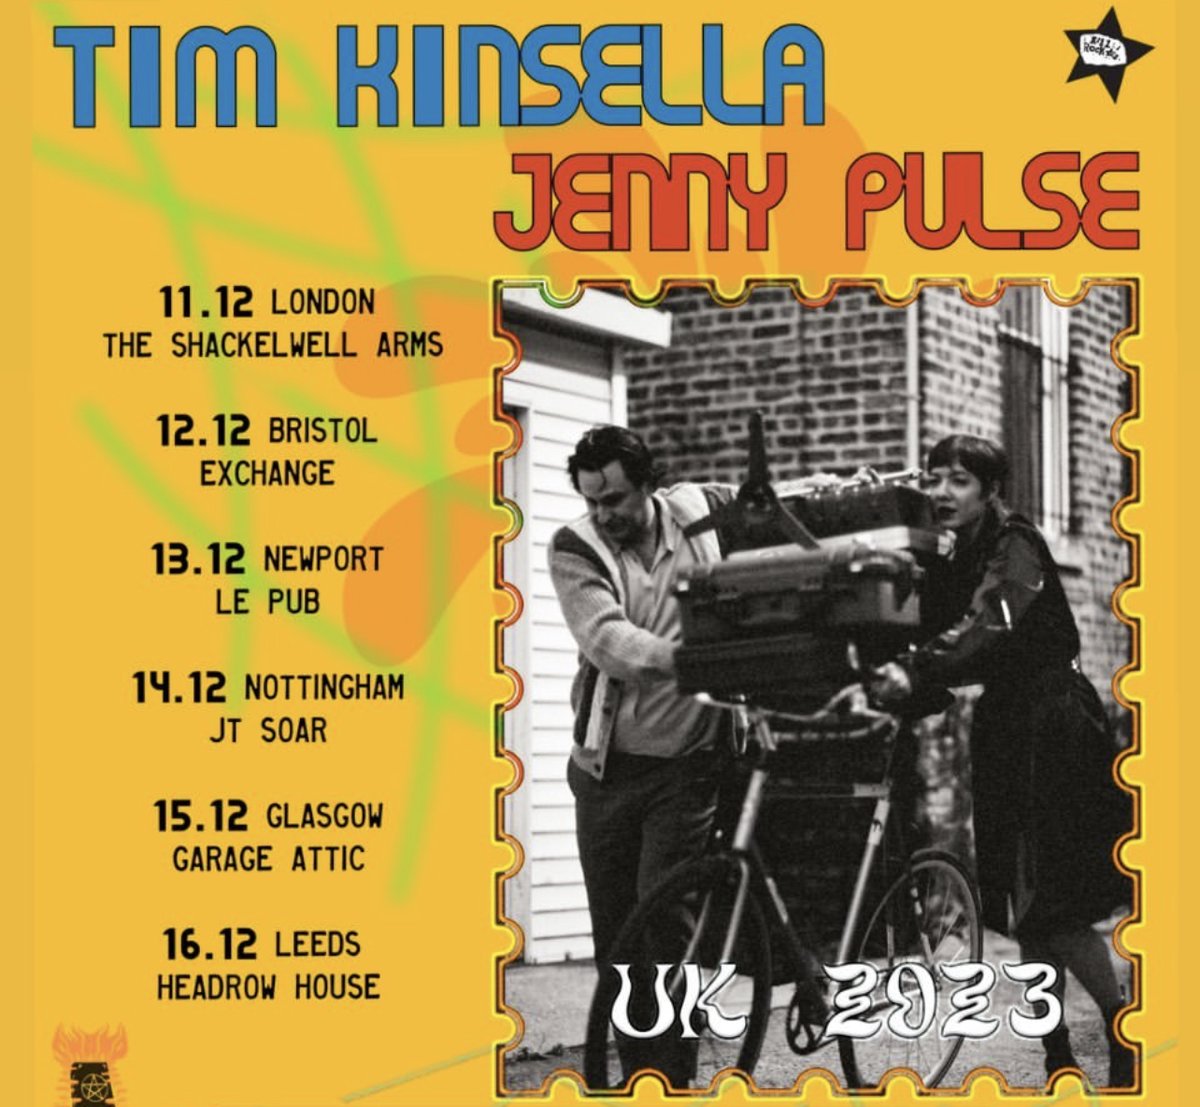 Huge show announcement! Tim Kinsella & Jenny Pulse are hitting the road this December. The pair known for their work in #CapnJazz, #JoanofArc bring their new album 'Giddy Shelter' to Le Pub on December 13th. Tickets are on sale now, grab yours! 🎟️ 👉 bit.ly/TimKinsella-Je…